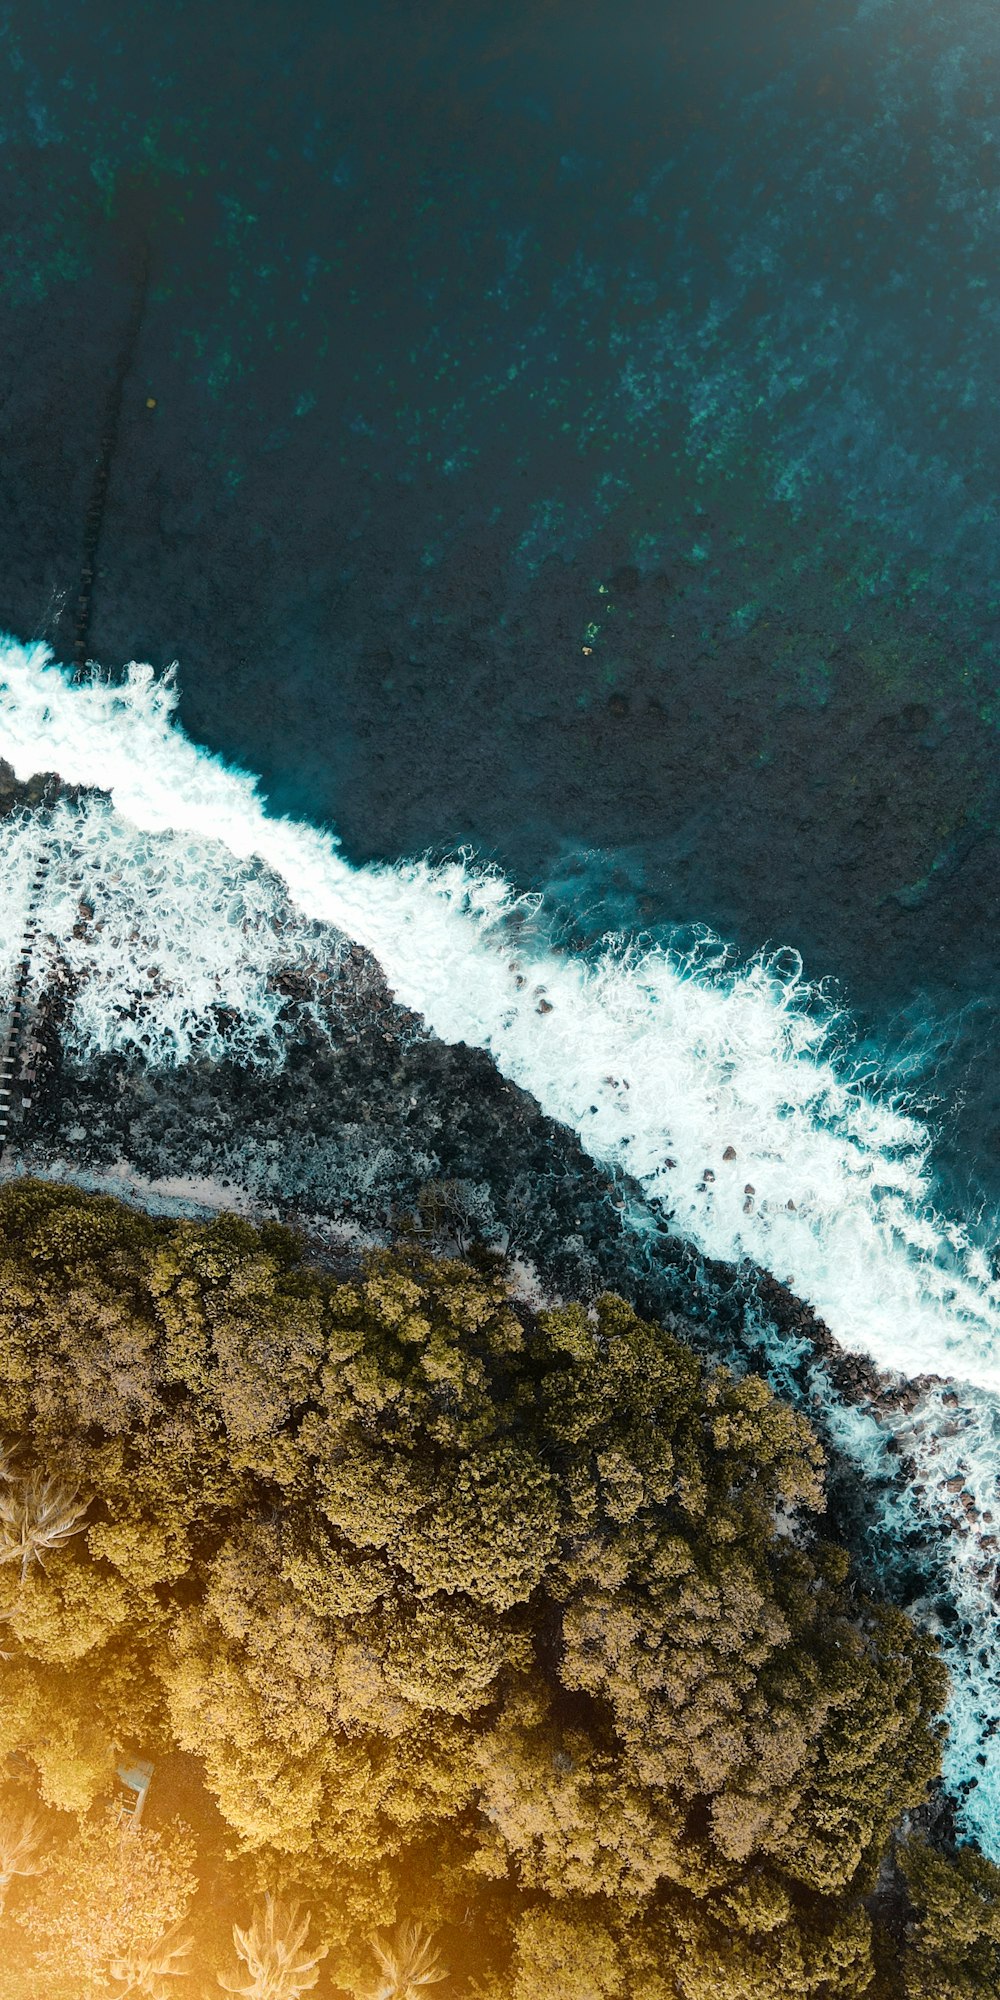 a bird's eye view of the ocean and trees